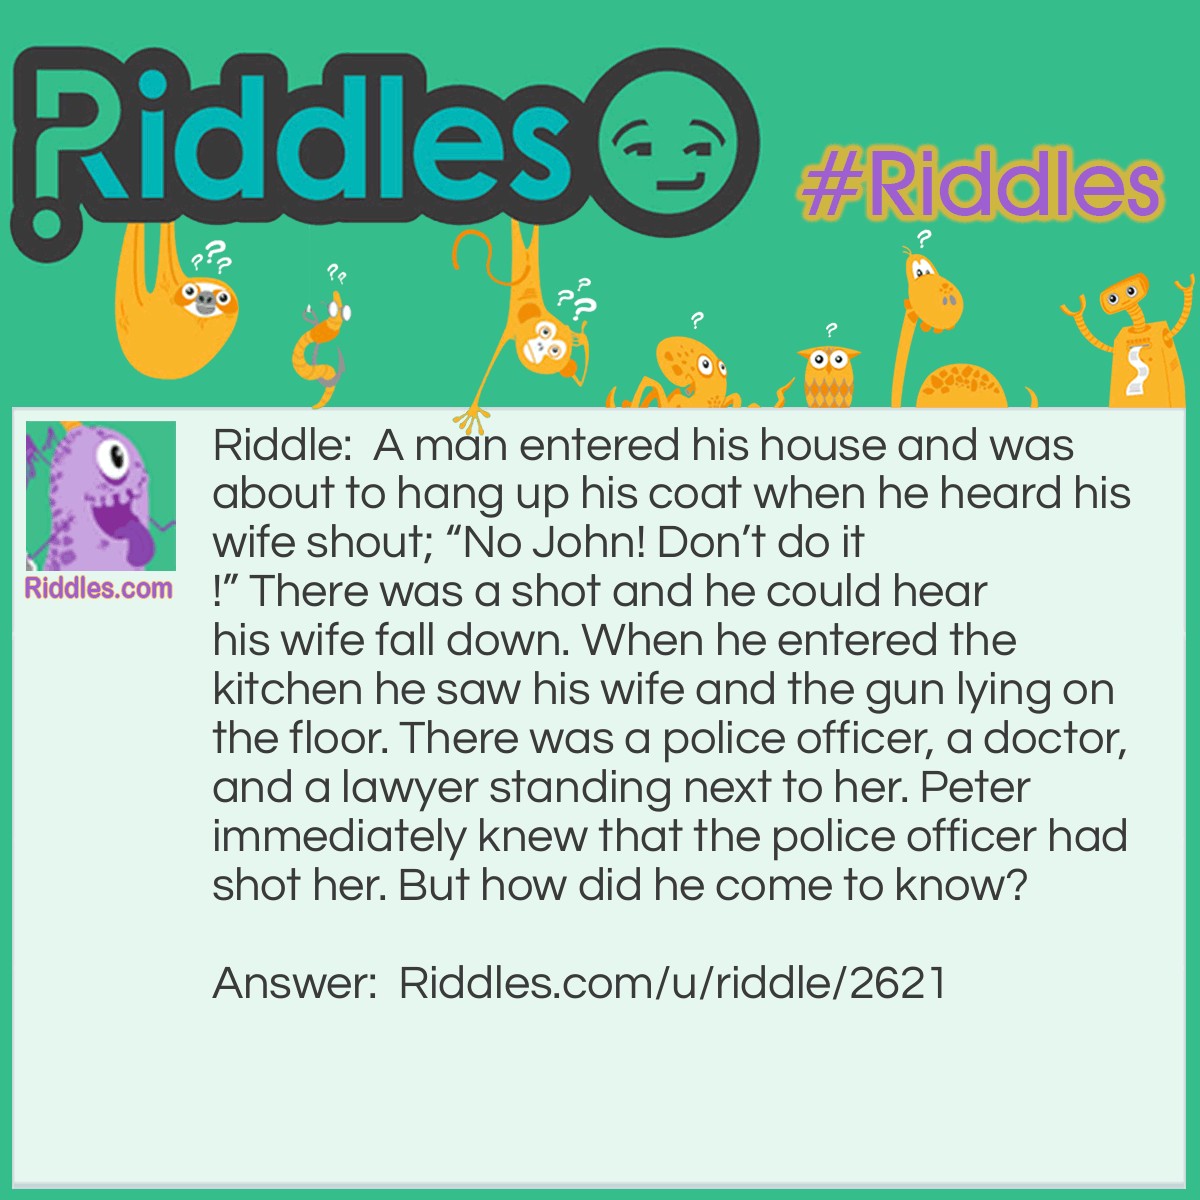 Riddle: A man entered his house and was about to hang up his coat when he heard his wife shout; "No John! Don't do it!" There was a shot and he could hear his wife fall down. When he entered the kitchen he saw his wife and the gun lying on the floor. There was a police officer, a doctor, and a lawyer standing next to her. Peter immediately knew that the police officer had shot her. But how did he come to know? Answer: The policeman's name tag said John.